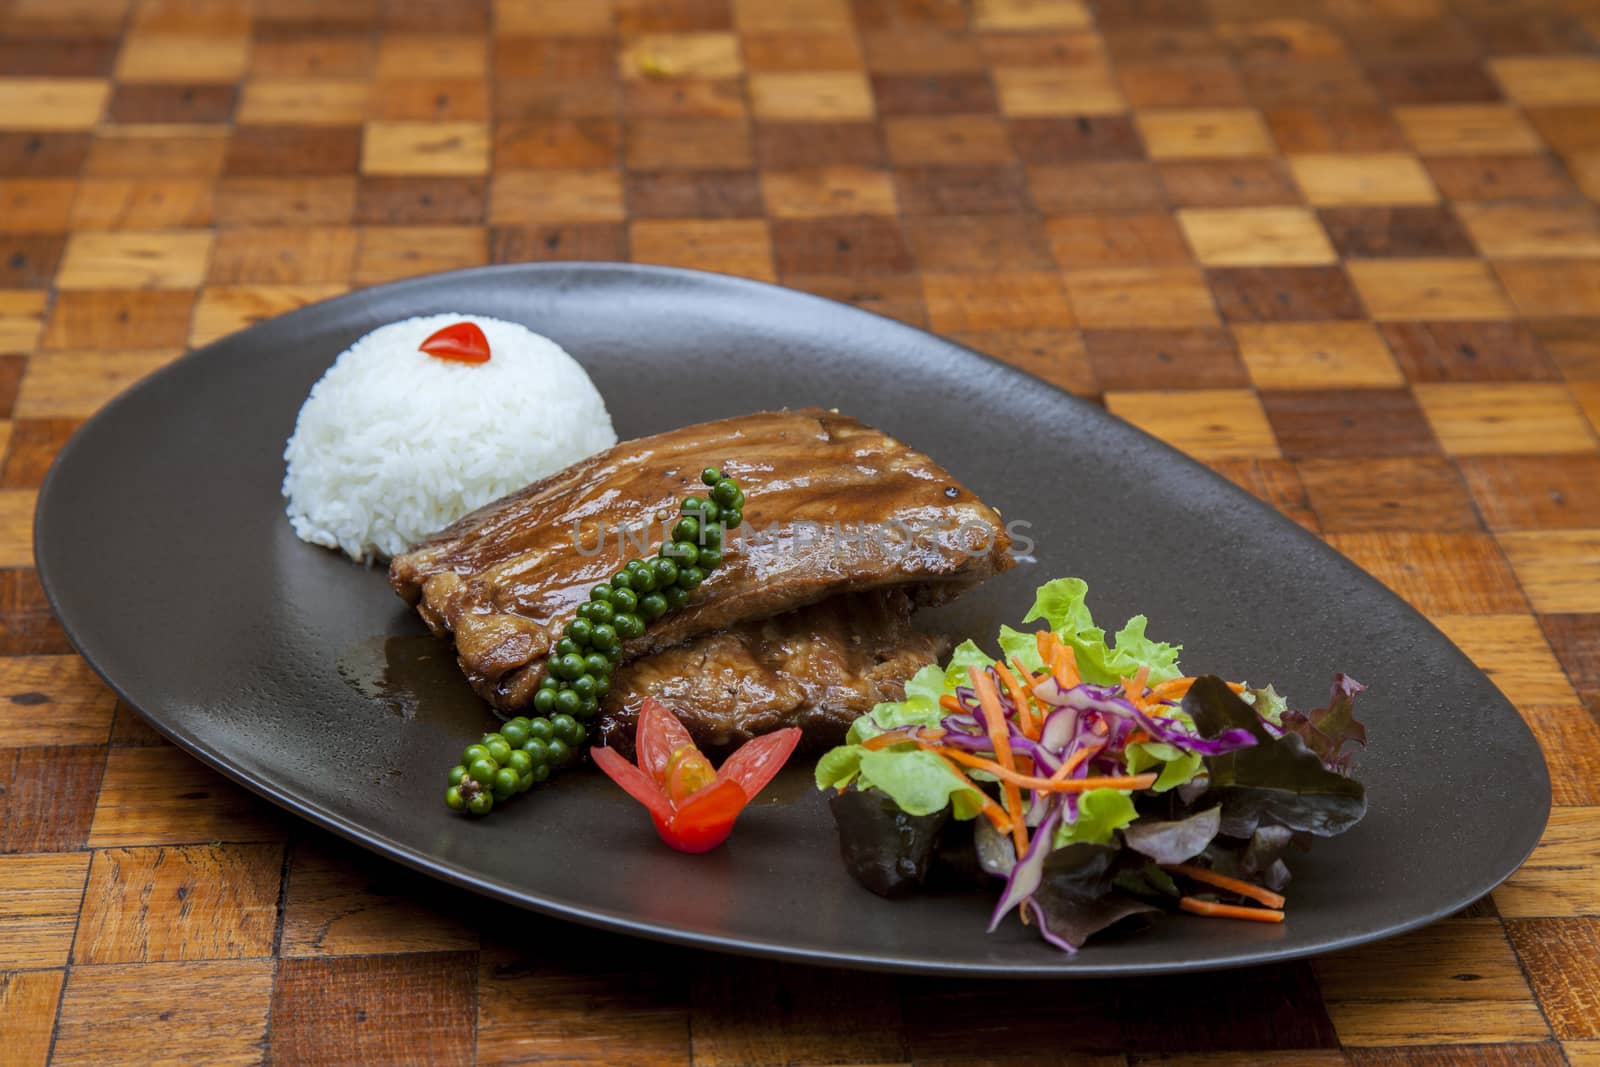 barbecued pork ribs with honey garlic sauce by jee1999